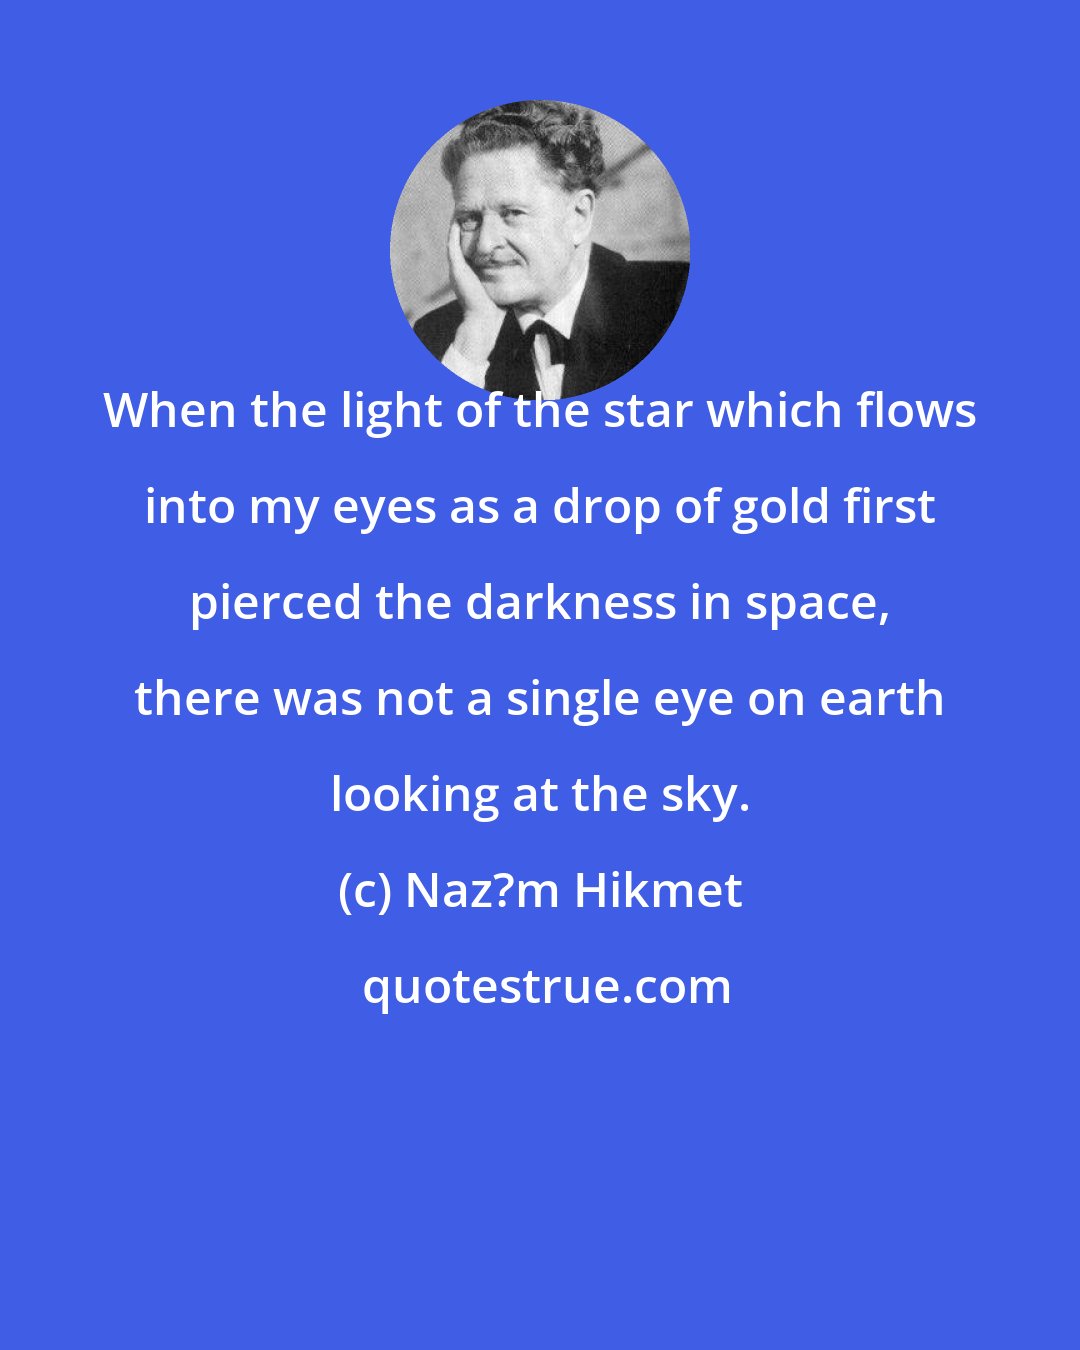 Naz?m Hikmet: When the light of the star which flows into my eyes as a drop of gold first pierced the darkness in space, there was not a single eye on earth looking at the sky.